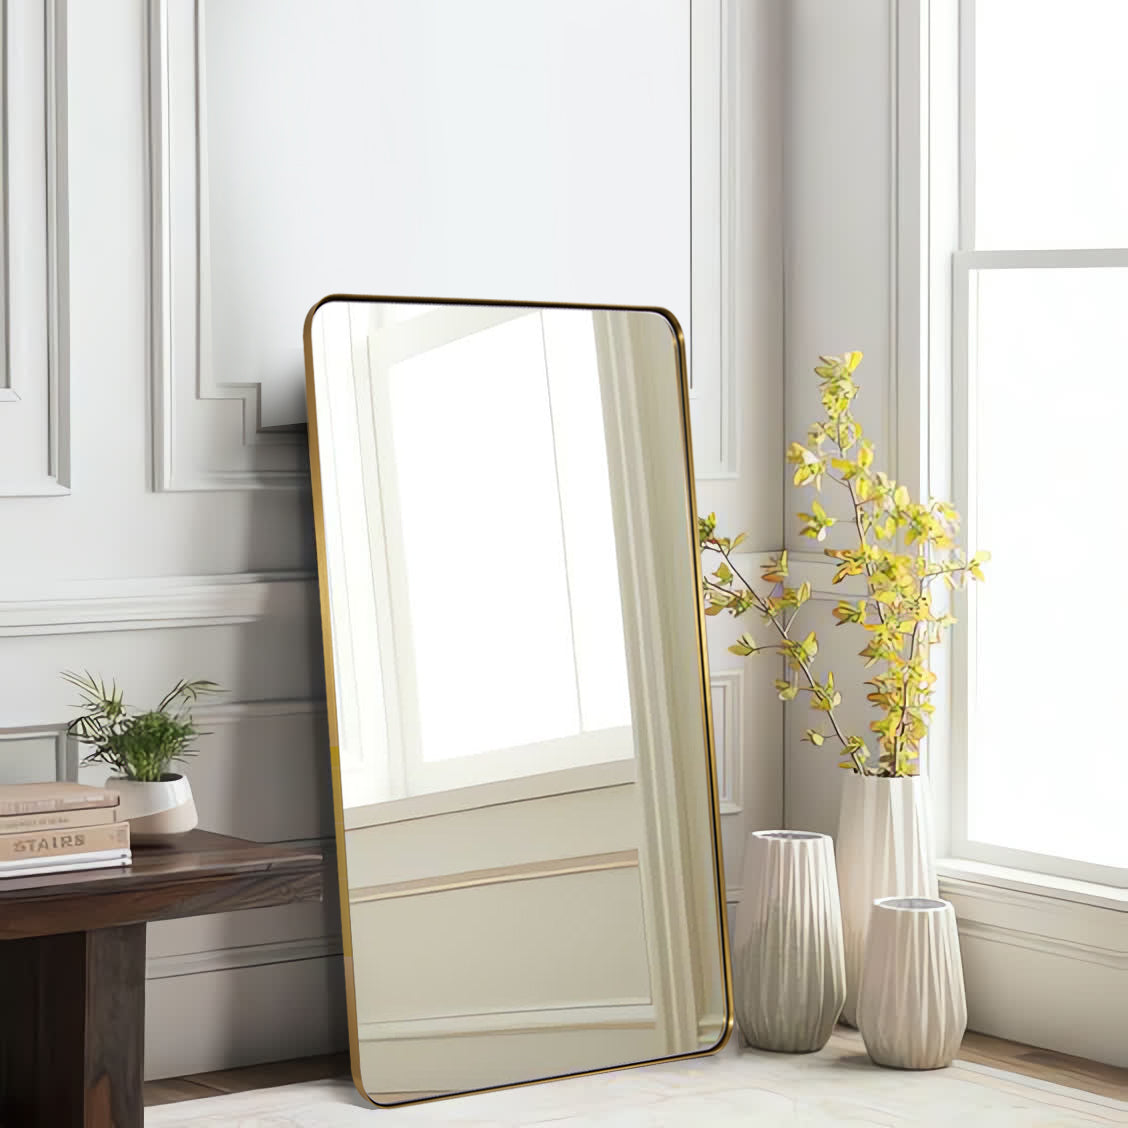 ANDY STAR® Full Length Mirror  Full Body  Long Mirror  Wall-mounted/Leaning Mirror